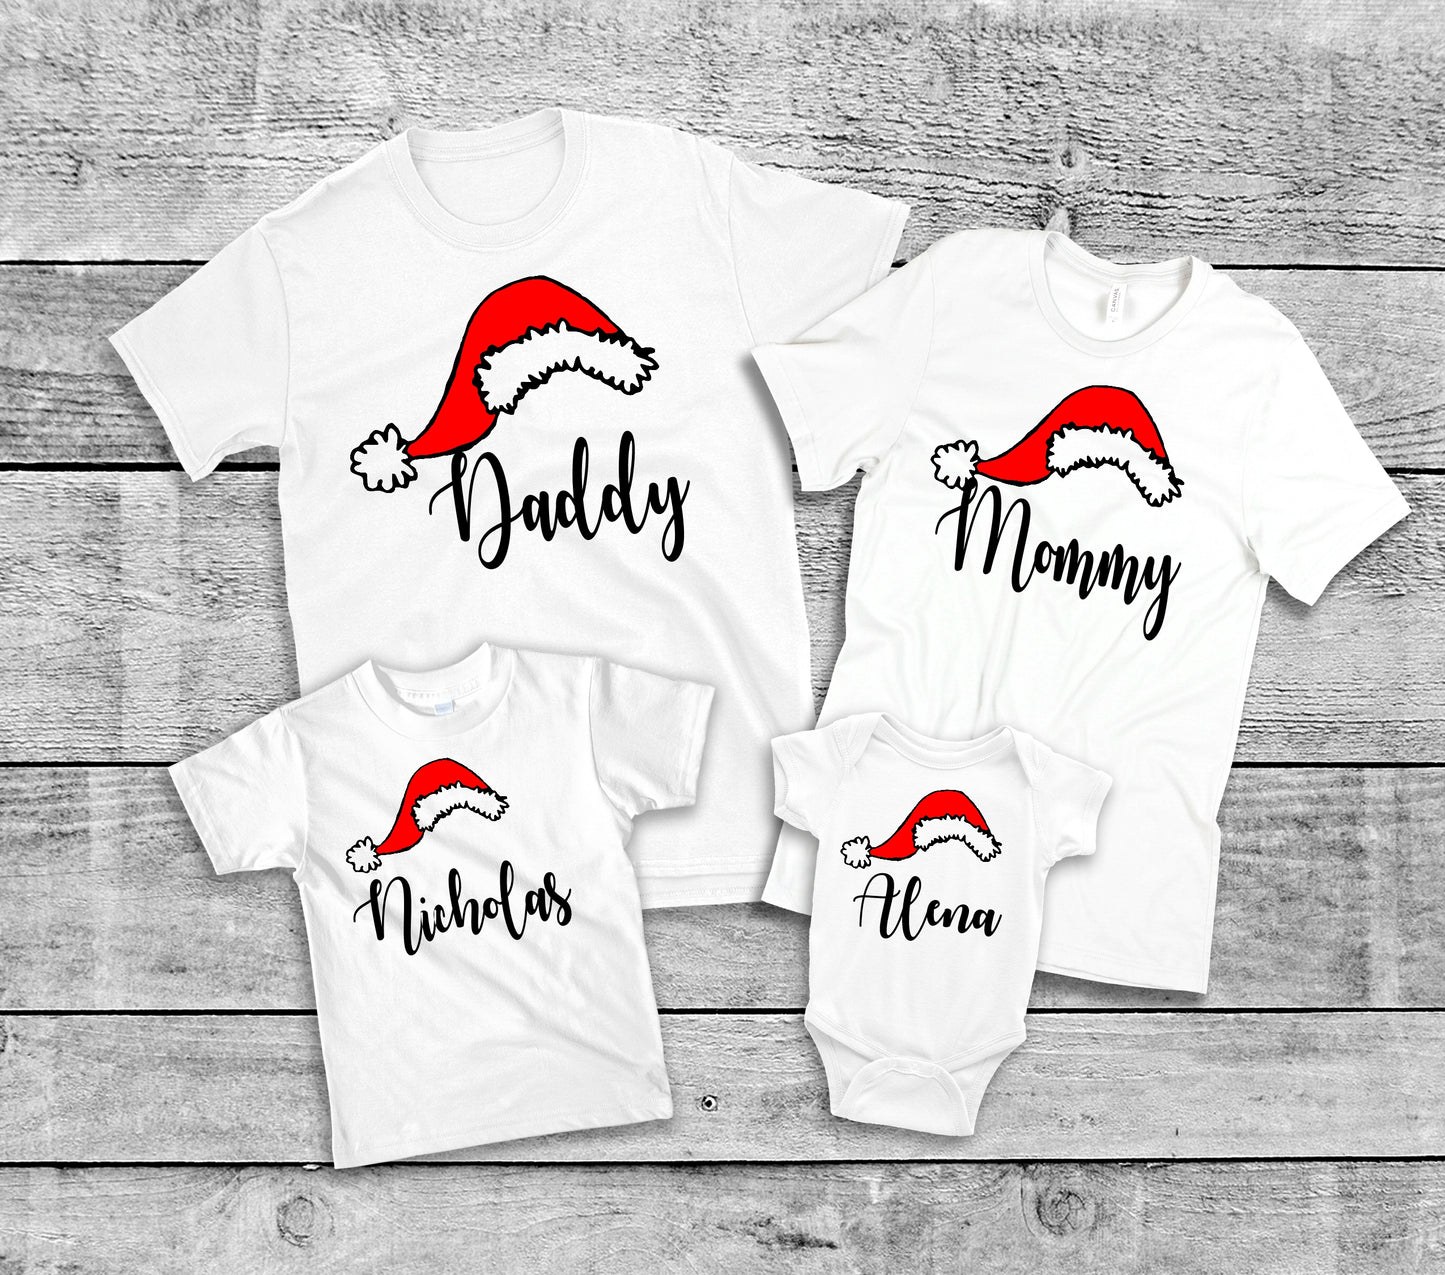 Personalized Family Christmas Shirts